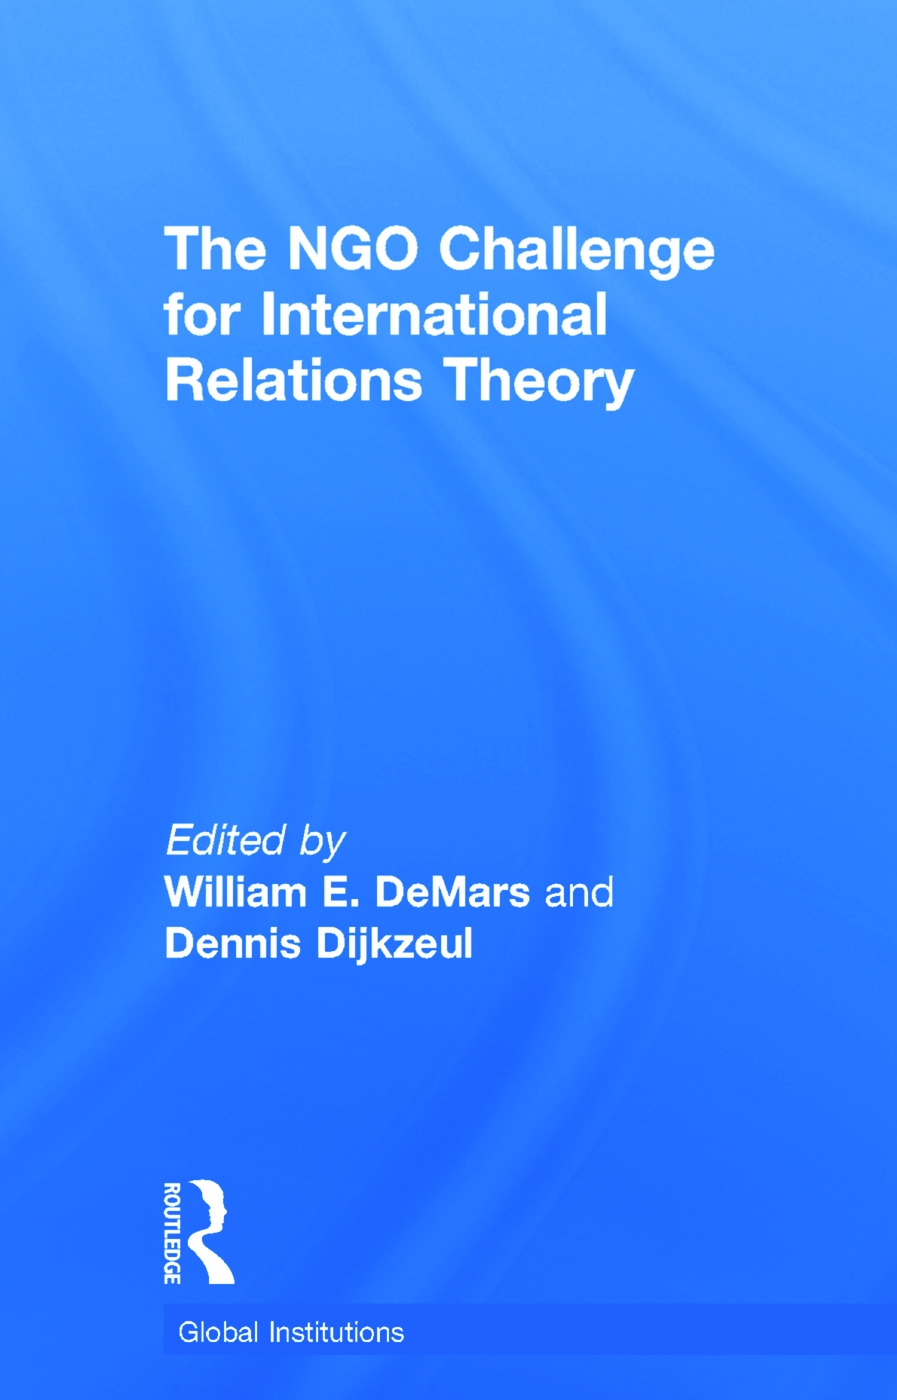 The Ngo Challenge for International Relations Theory